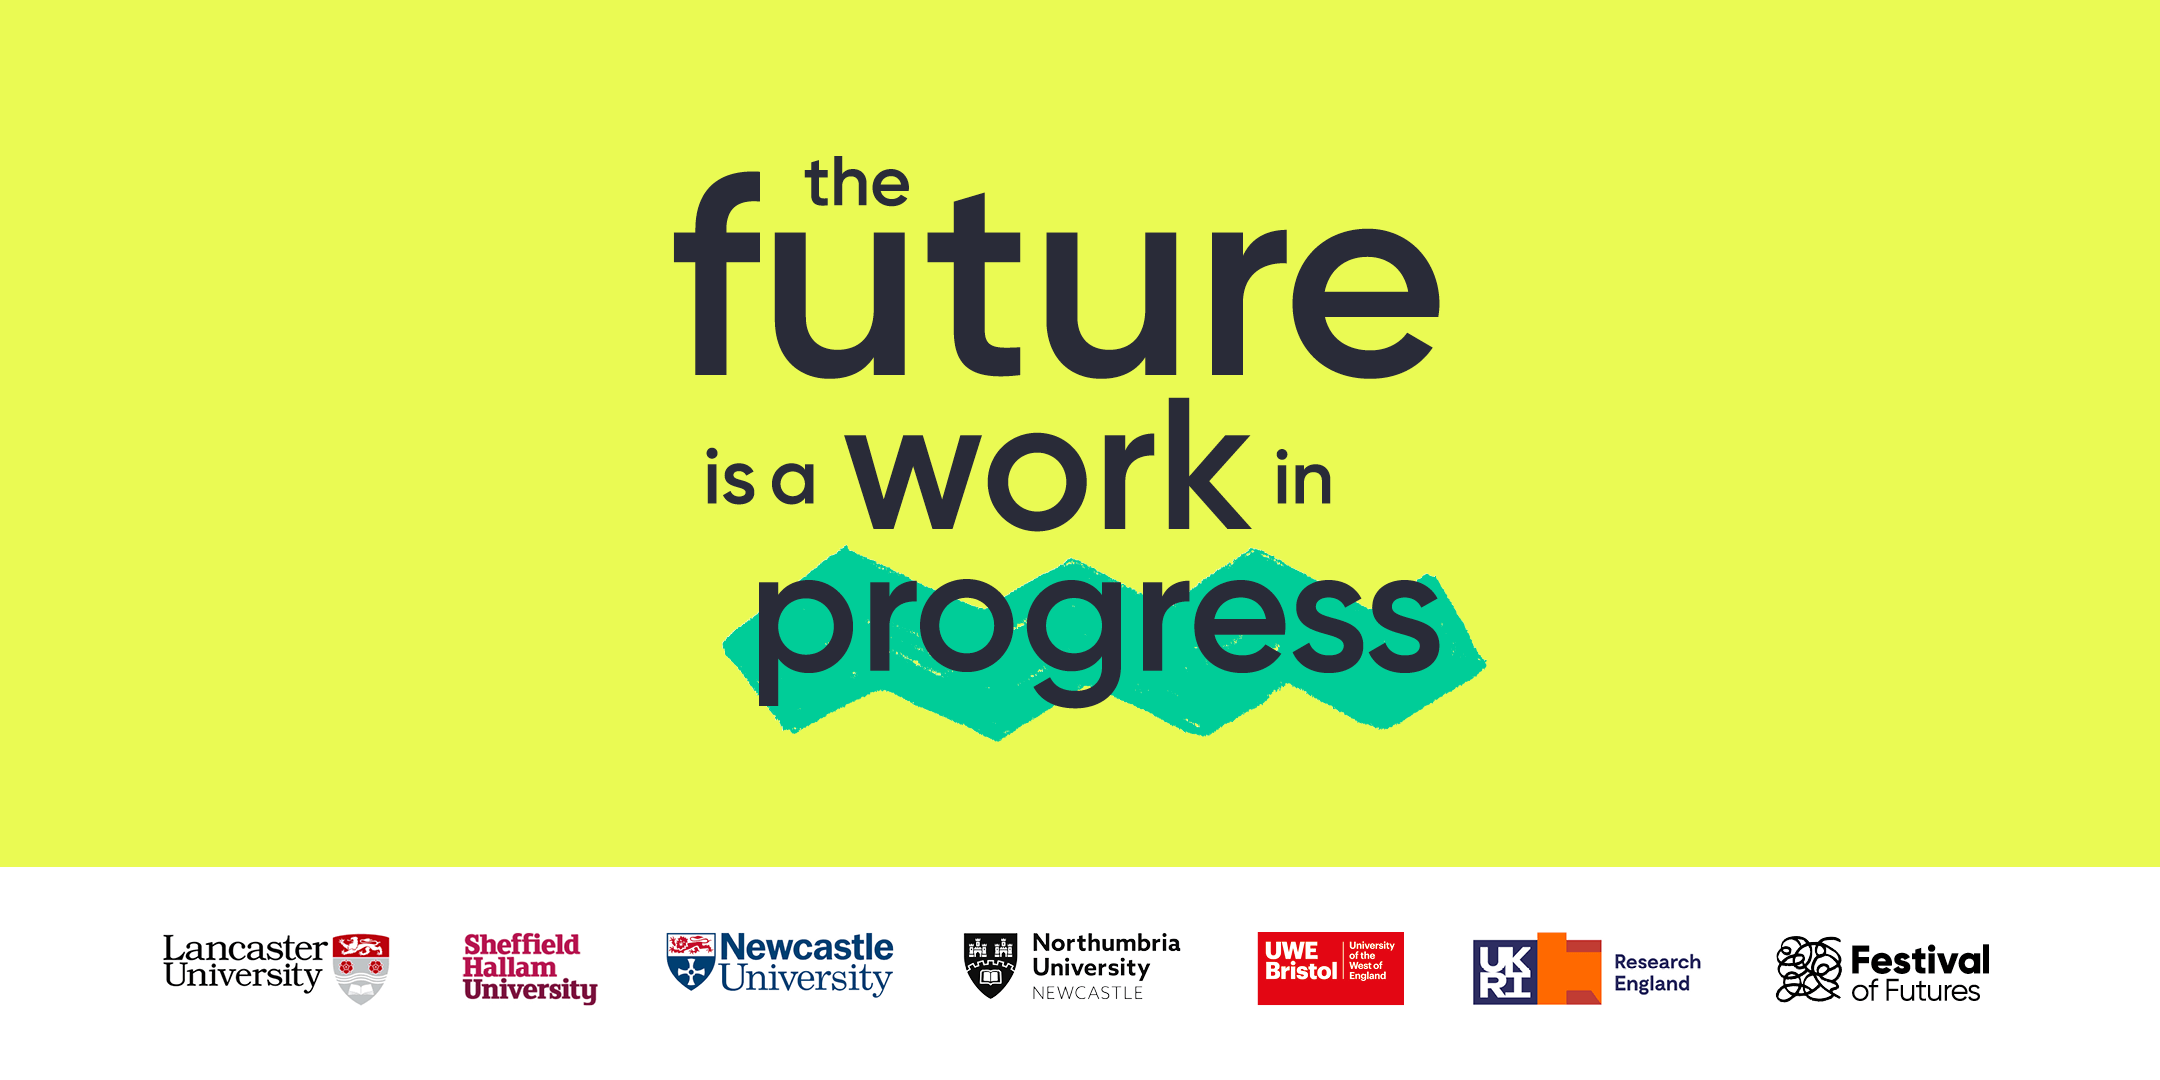 Embark on a journey of discovery at the Festival of Futures at Lancaster University